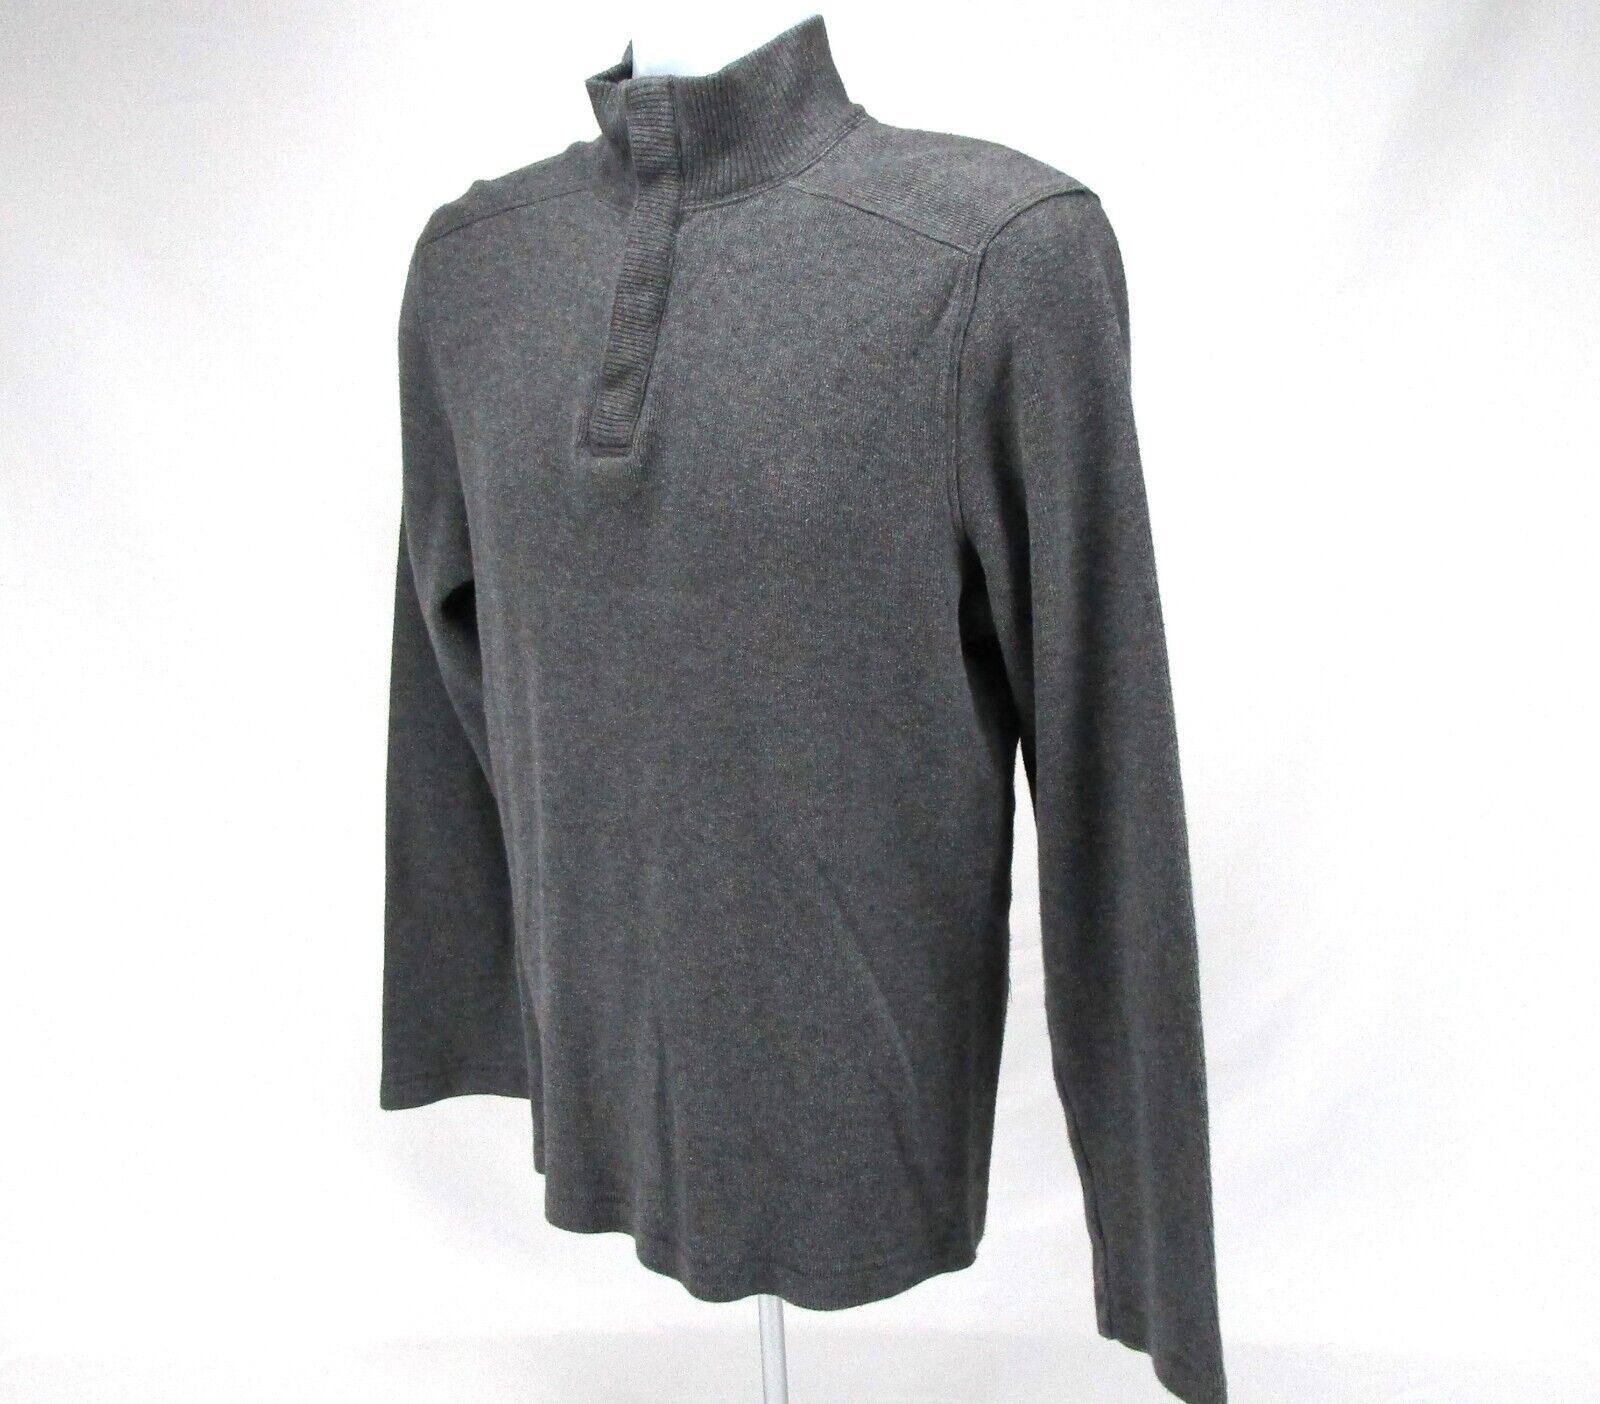 Primary image for Banana Republic Pullover Knit Sweater Mens Sz M Gray Long Sleeve Apparel